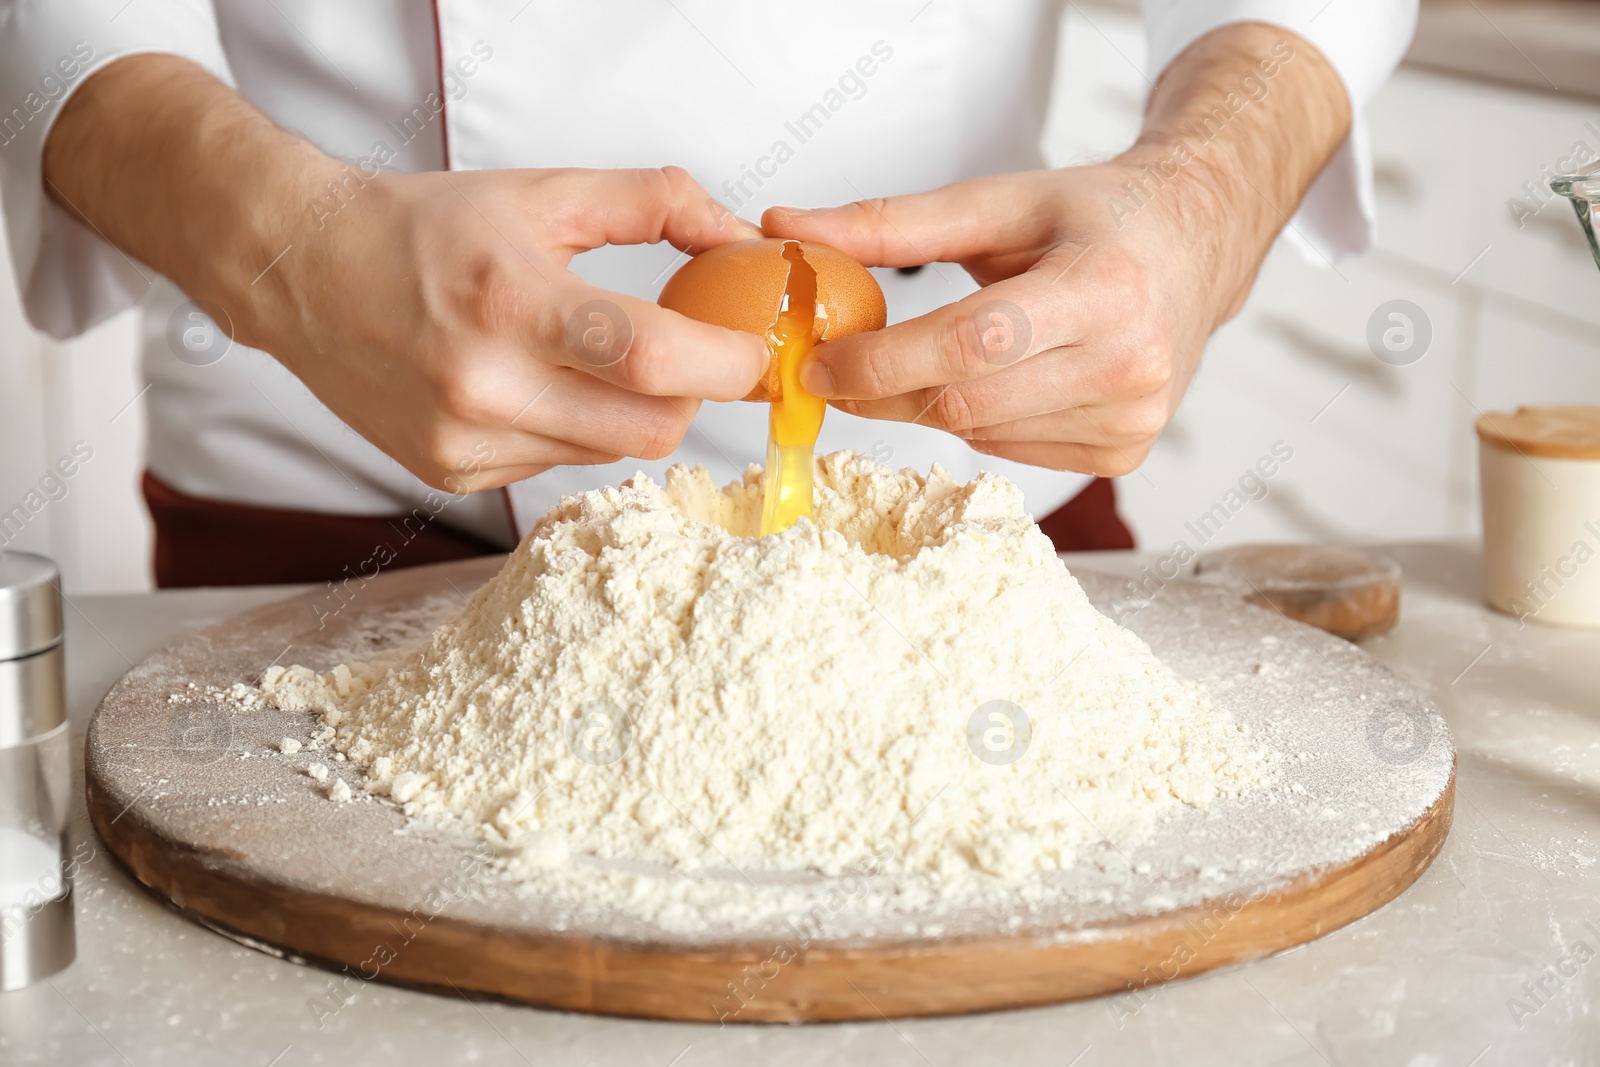 Photo of Male chef breaking egg over pile of flour on board in kitchen